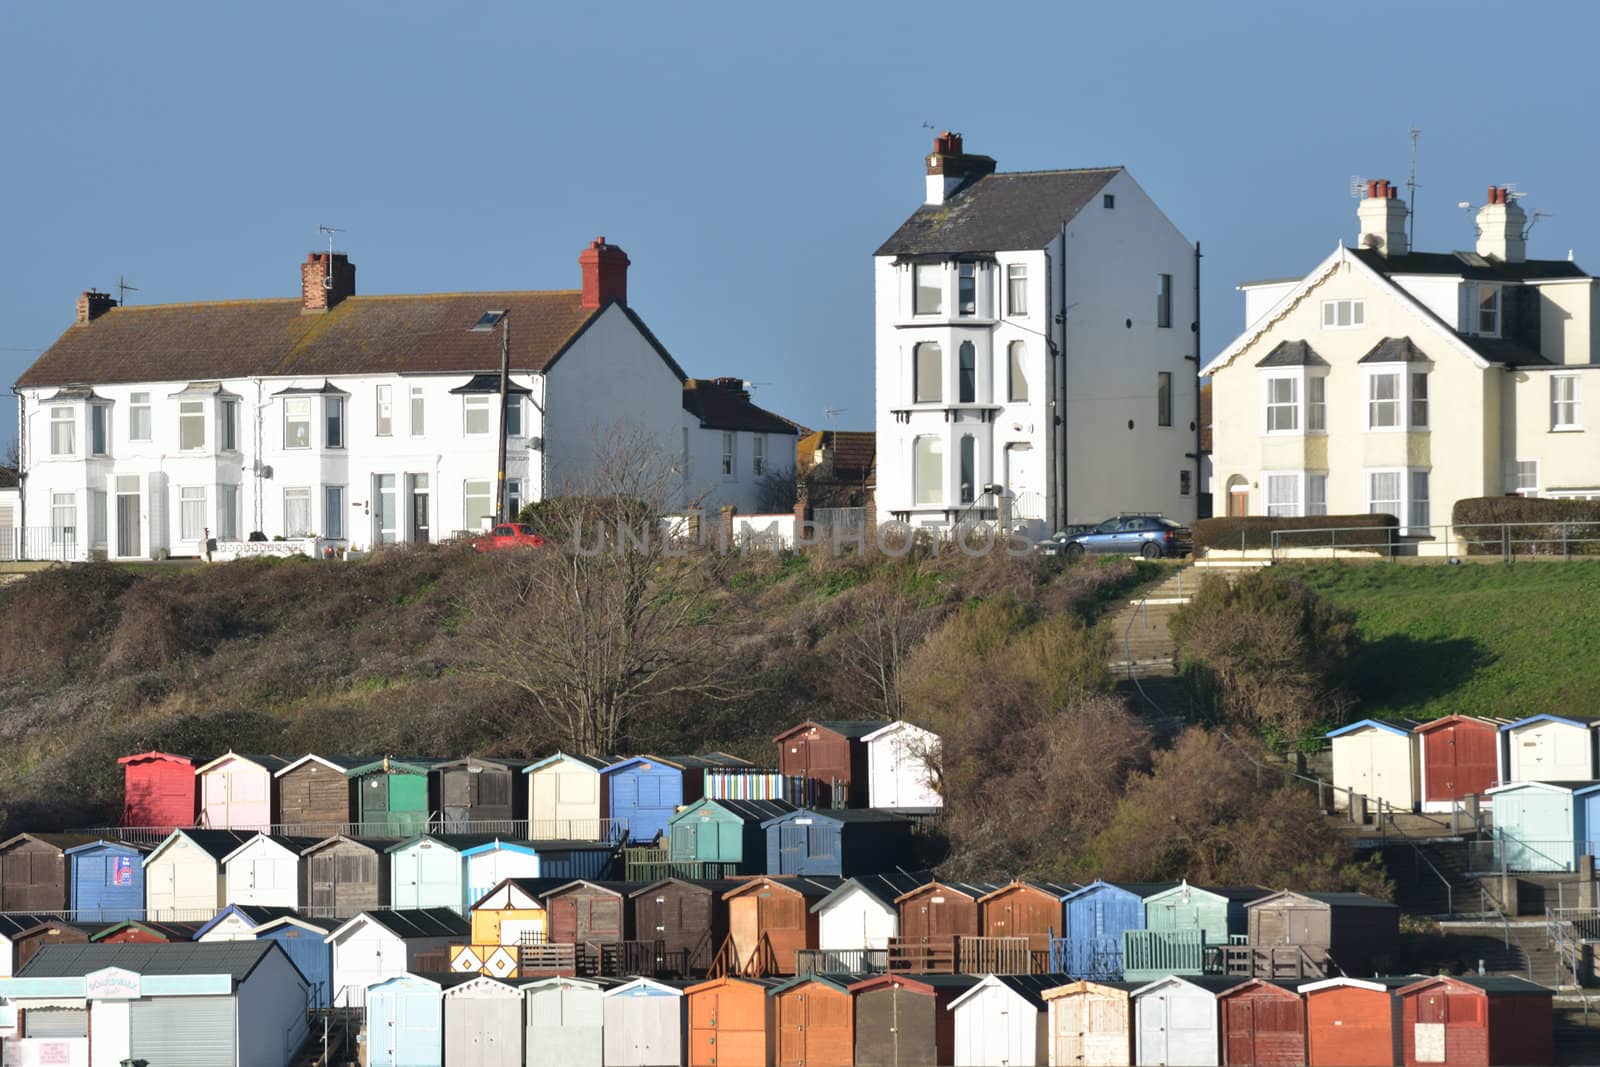 View of Beach huts and houses at Walton on Naze